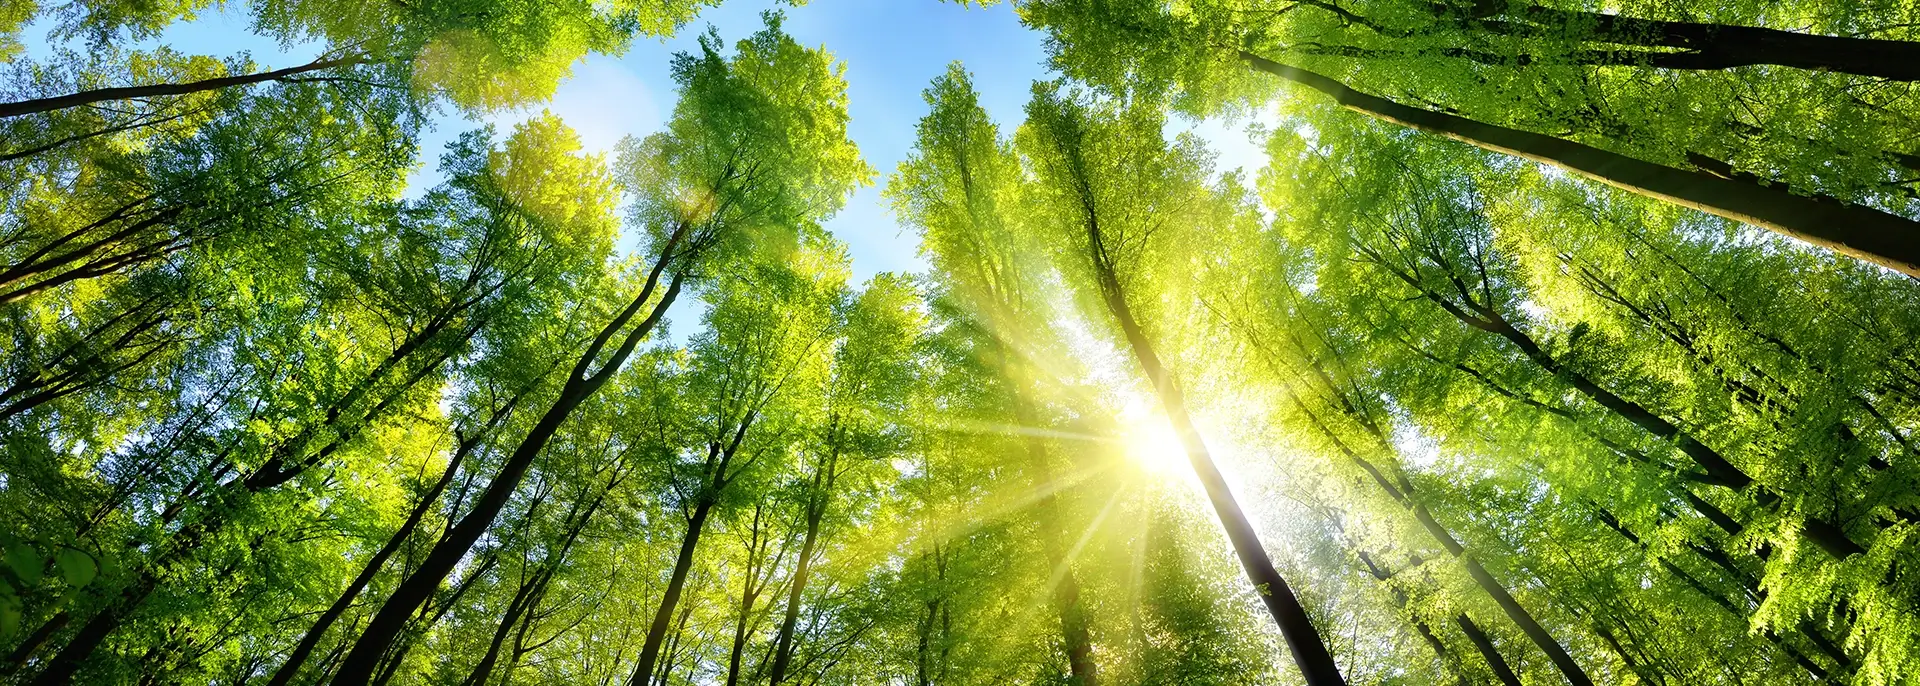 Tall green trees with the sun shining through